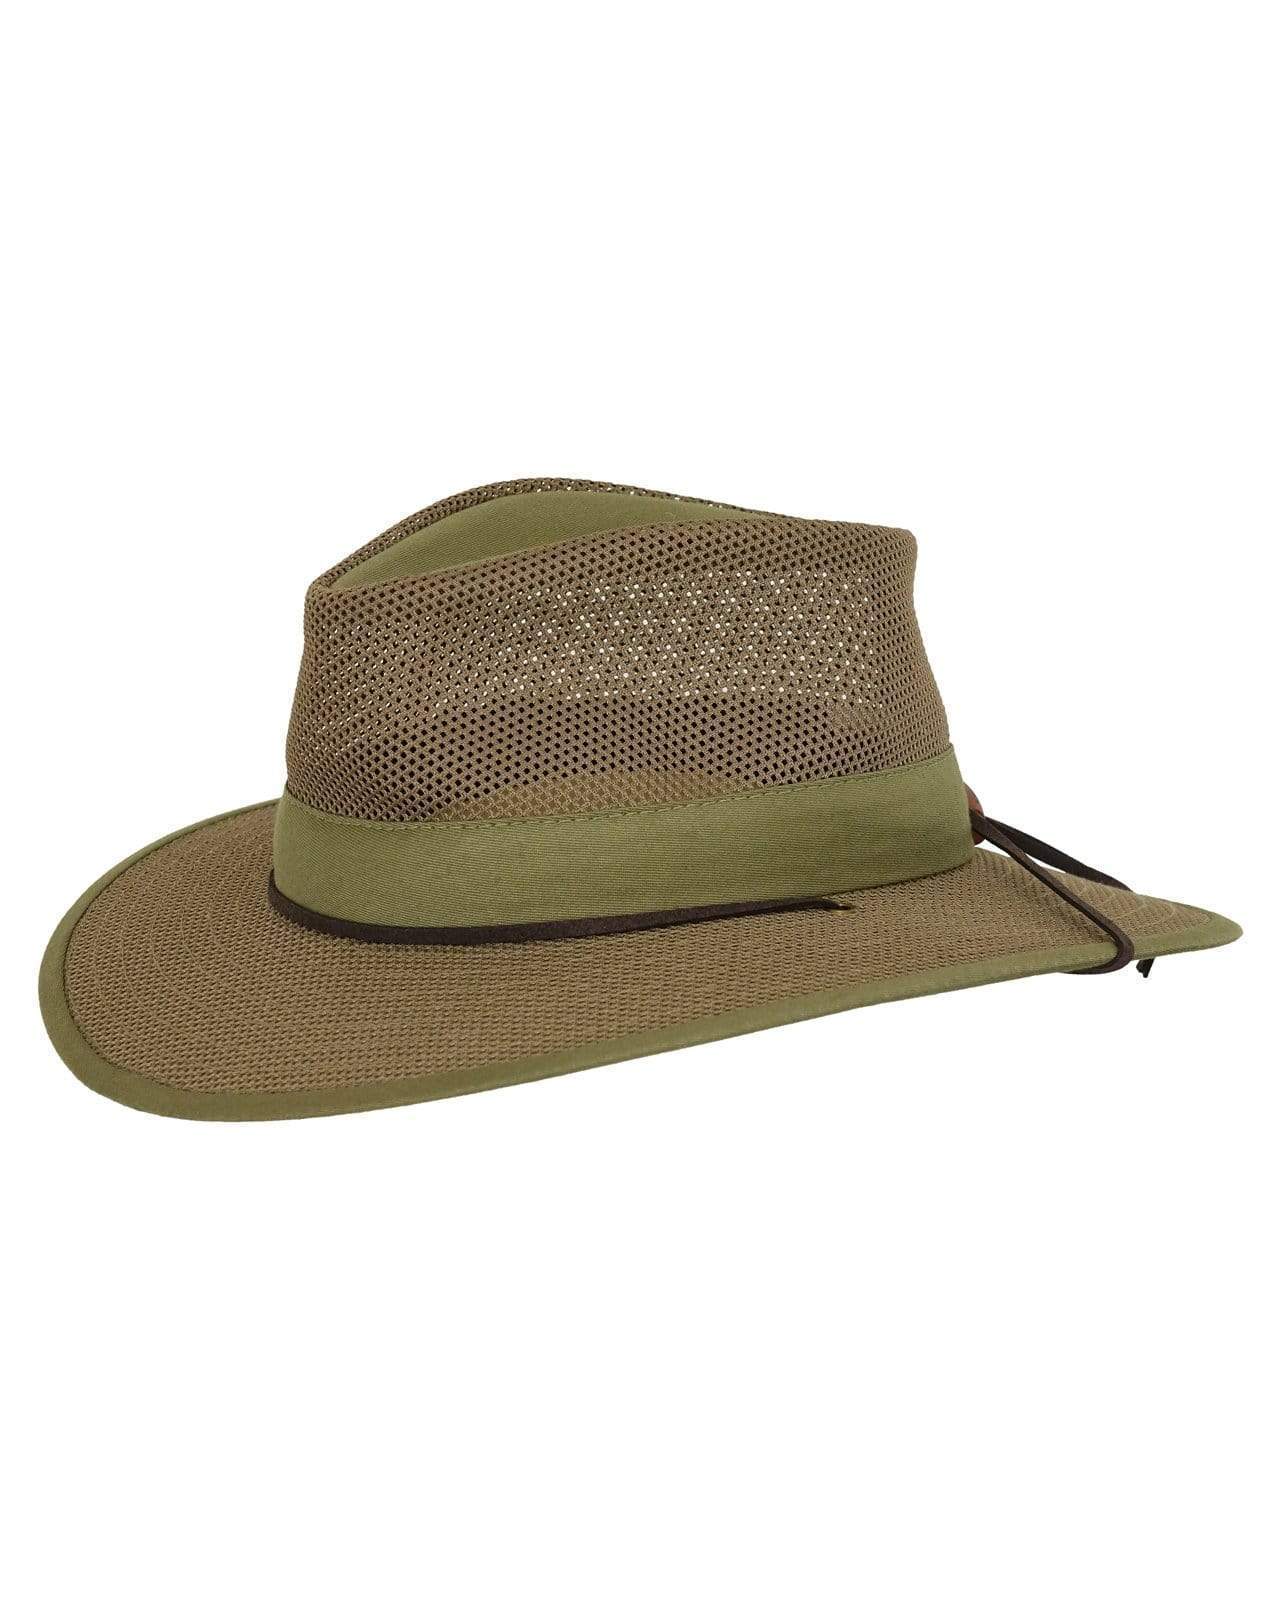 Stirling Creek Outdoor Hats By Outback Trading Company , 46% OFF